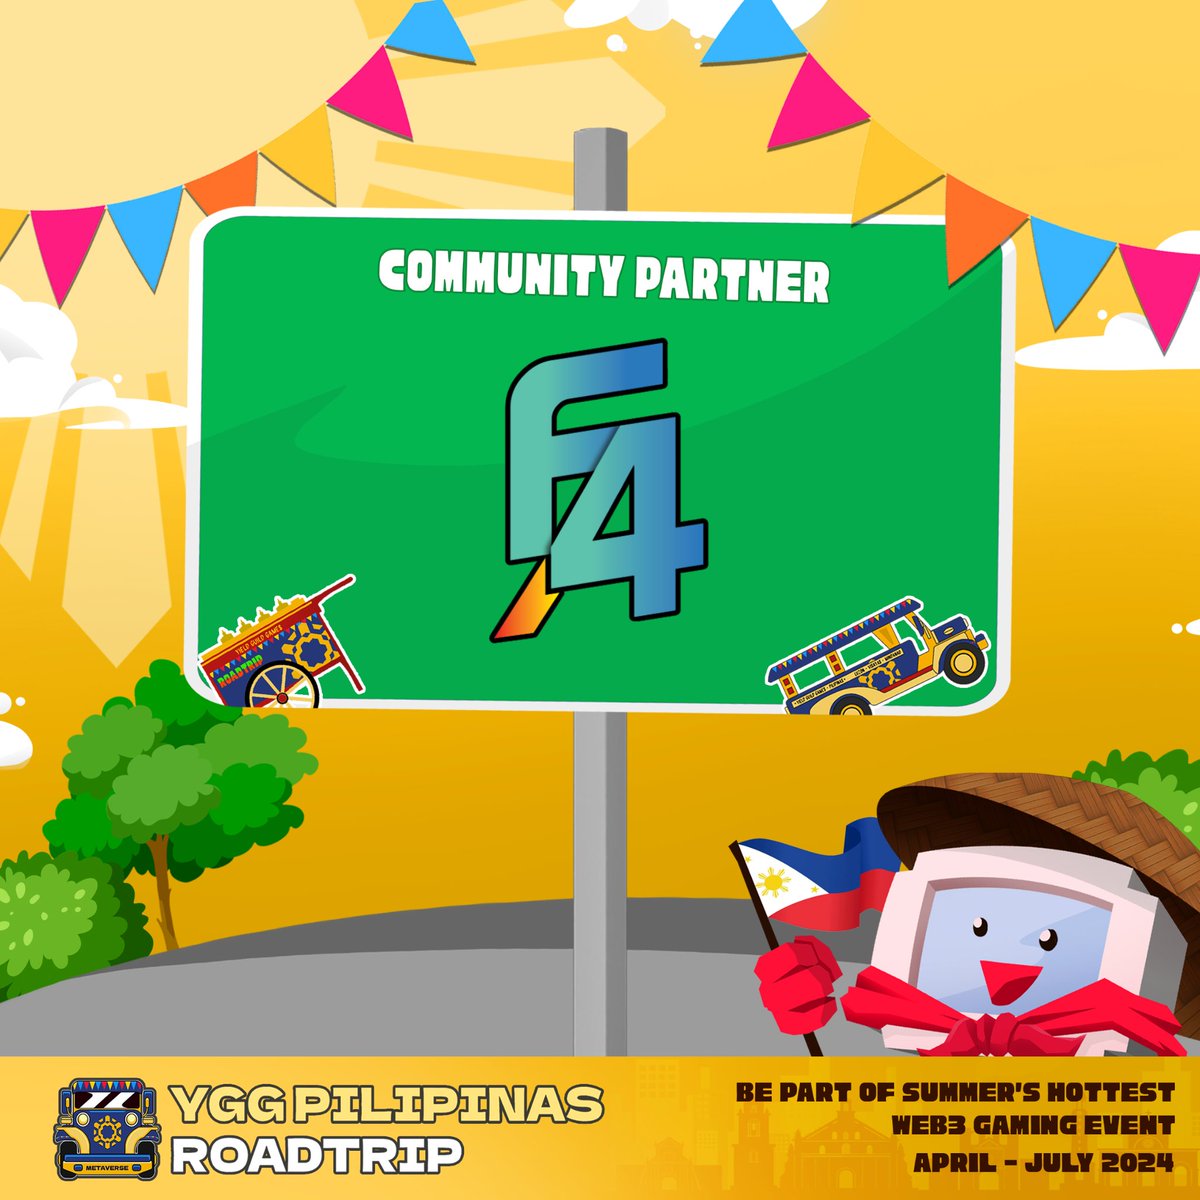 F4A is now a part of the community partners of the @Yggphroadtrip!

See you at the final stop in Metro Manila on July 6, 2024!
lu.ma/rdtrpmanila
#YGGRoadtrip2024 #biyahengweb3